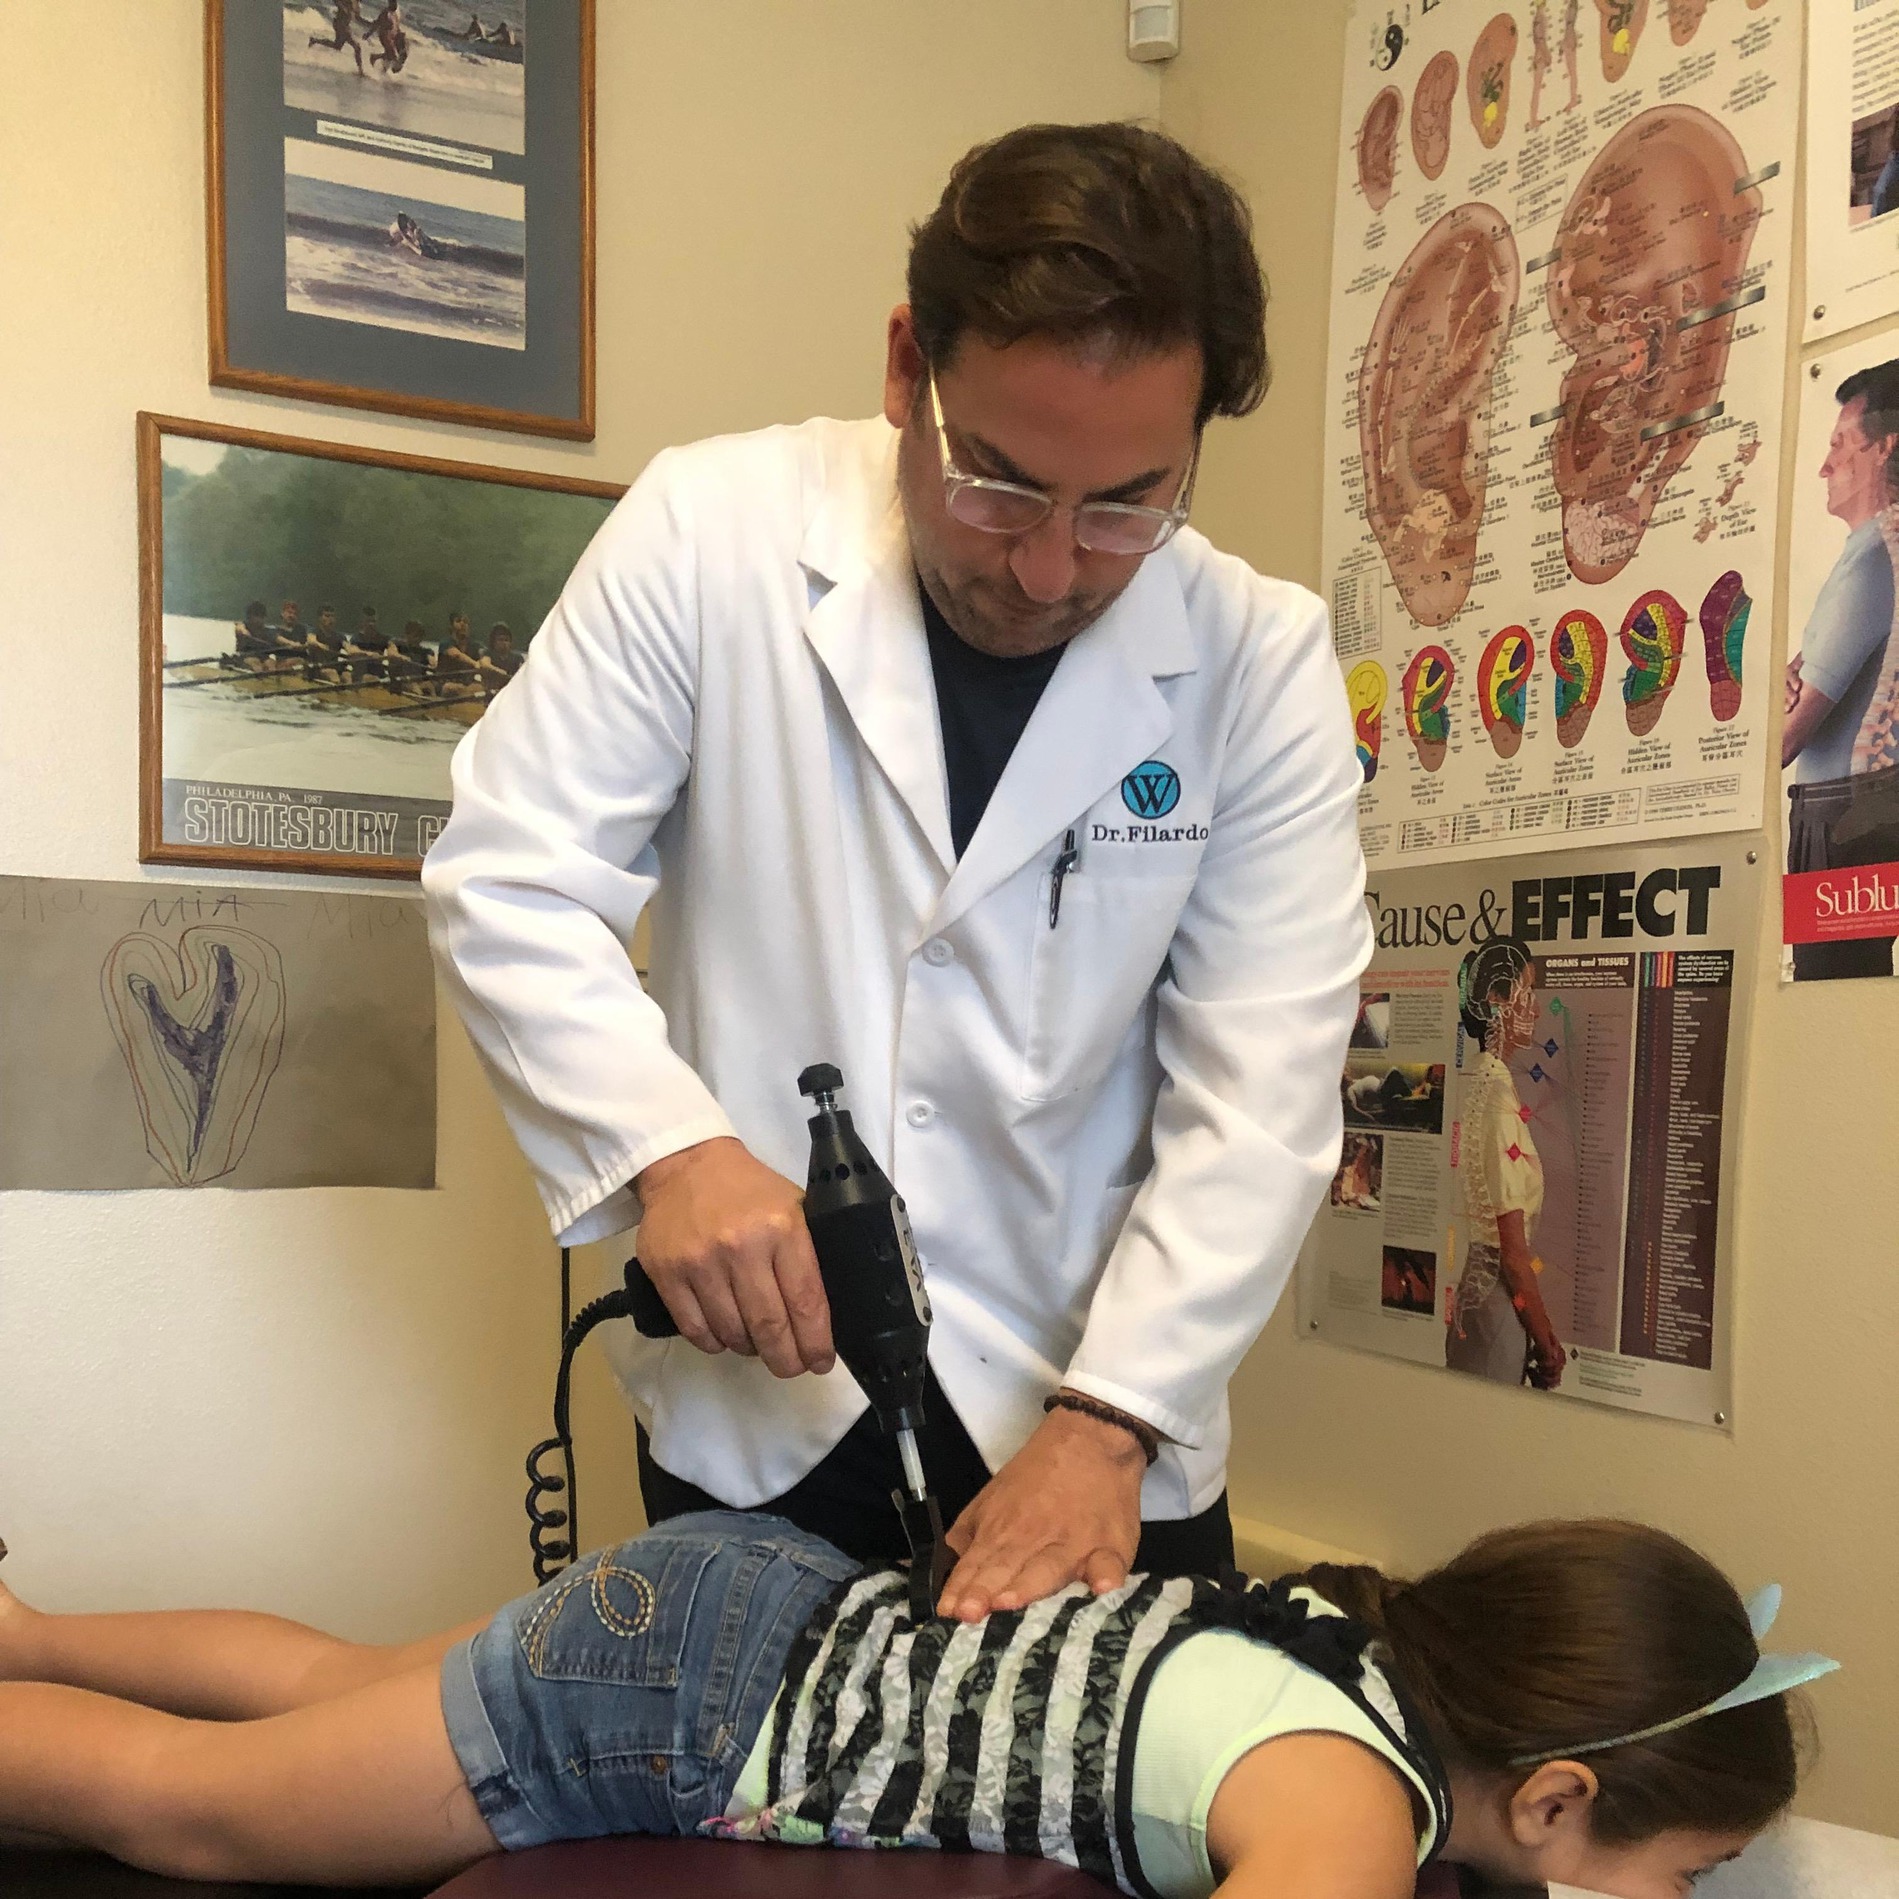 Dr. Filardo has over 15 years treating patients.
407-622-2251
Winter Park Chiropractic & Acupuncture